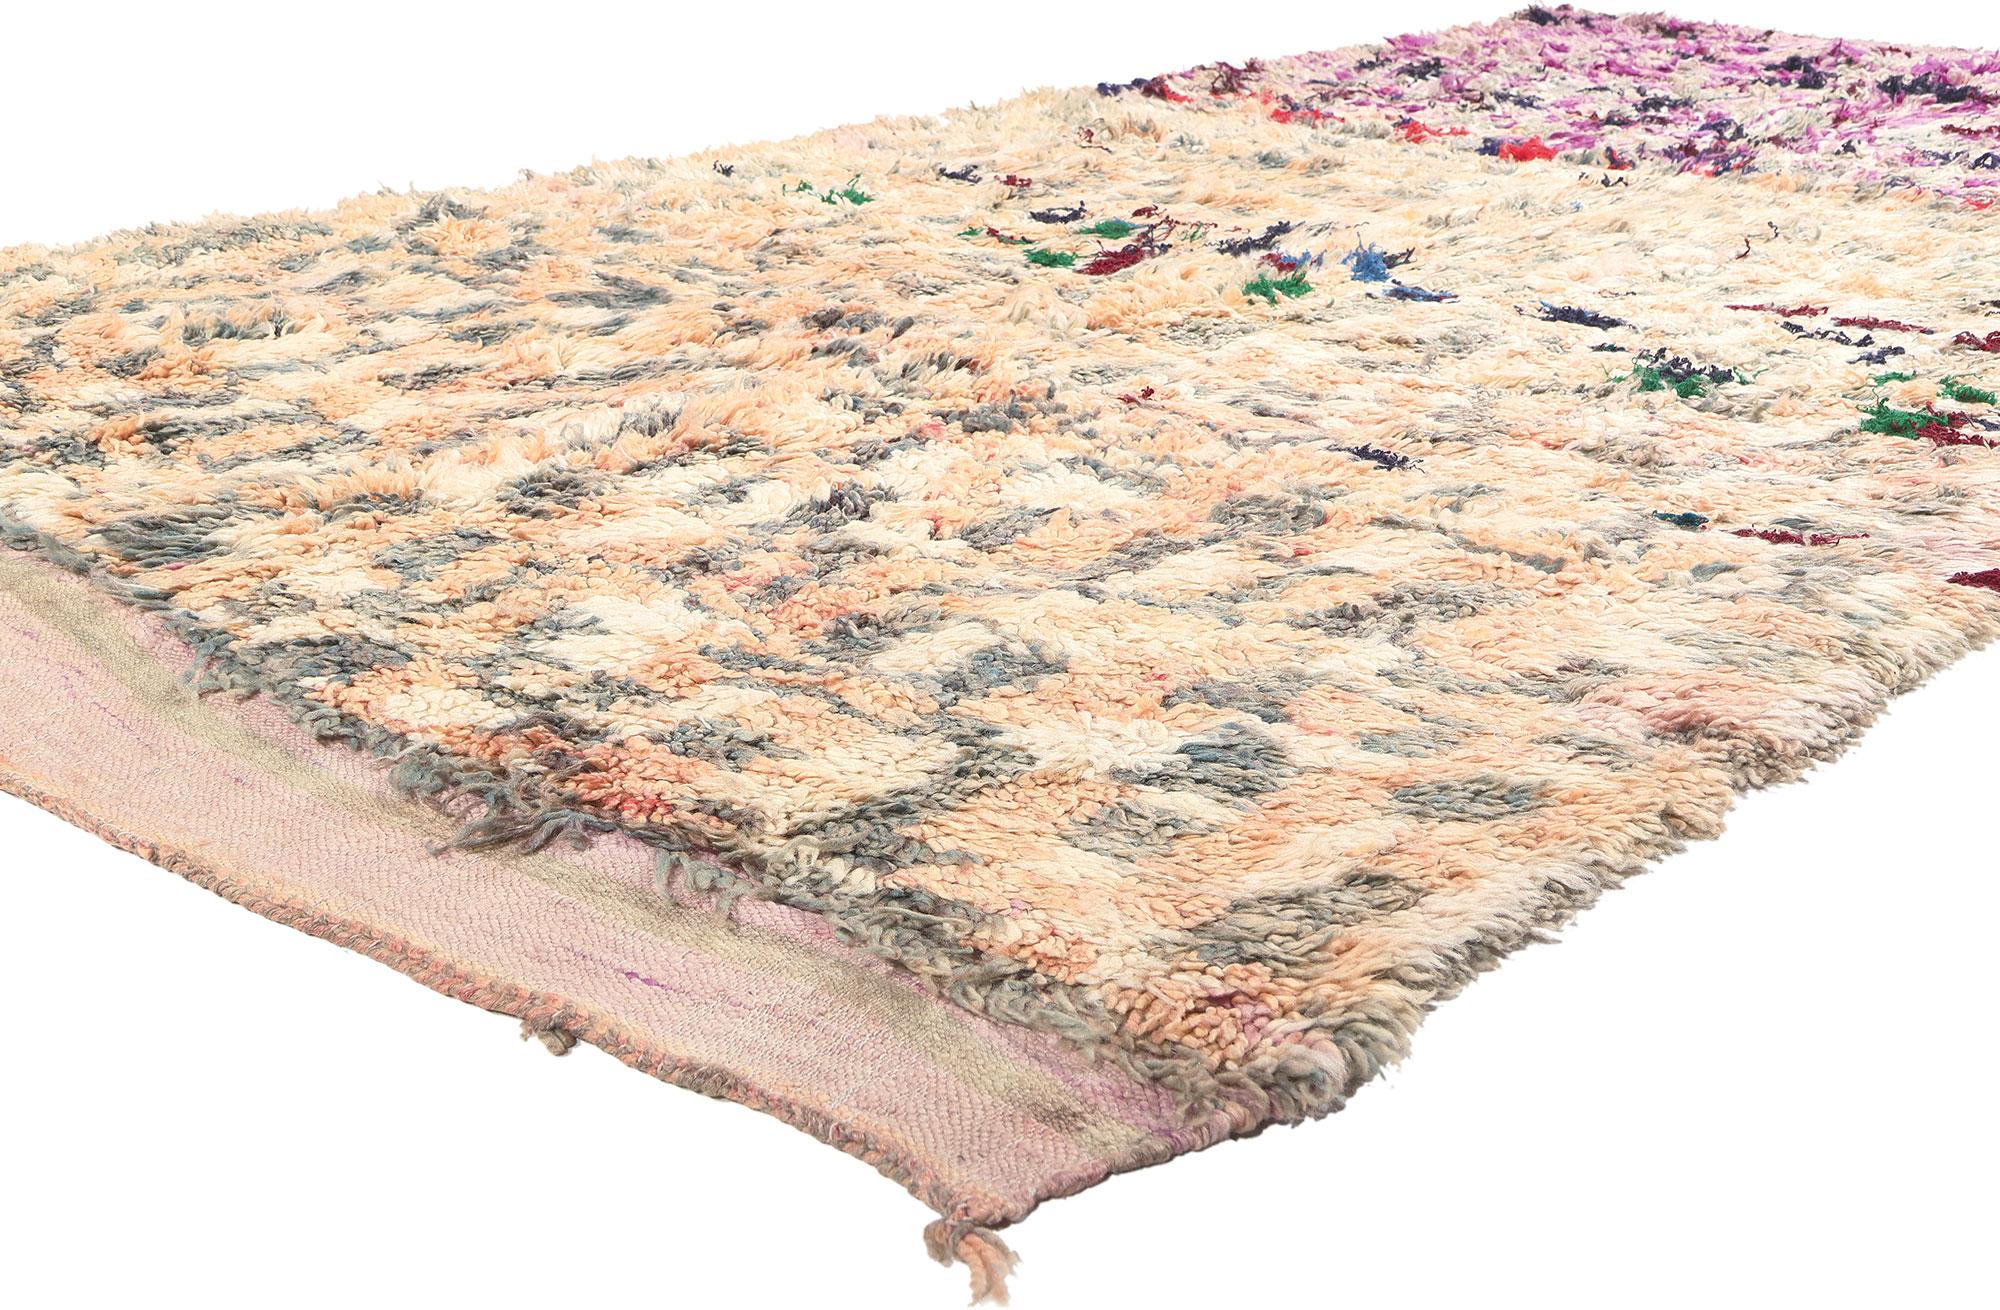 20518 Vintage Boujad Moroccan Rug, 06'00 x 10'04. Boujad rugs, hailing from the vibrant city of Boujad in the Khouribga region, are renowned for their eccentric and artistic designs, blending primitive charm, ancient symbolism, and Folk Art warmth.